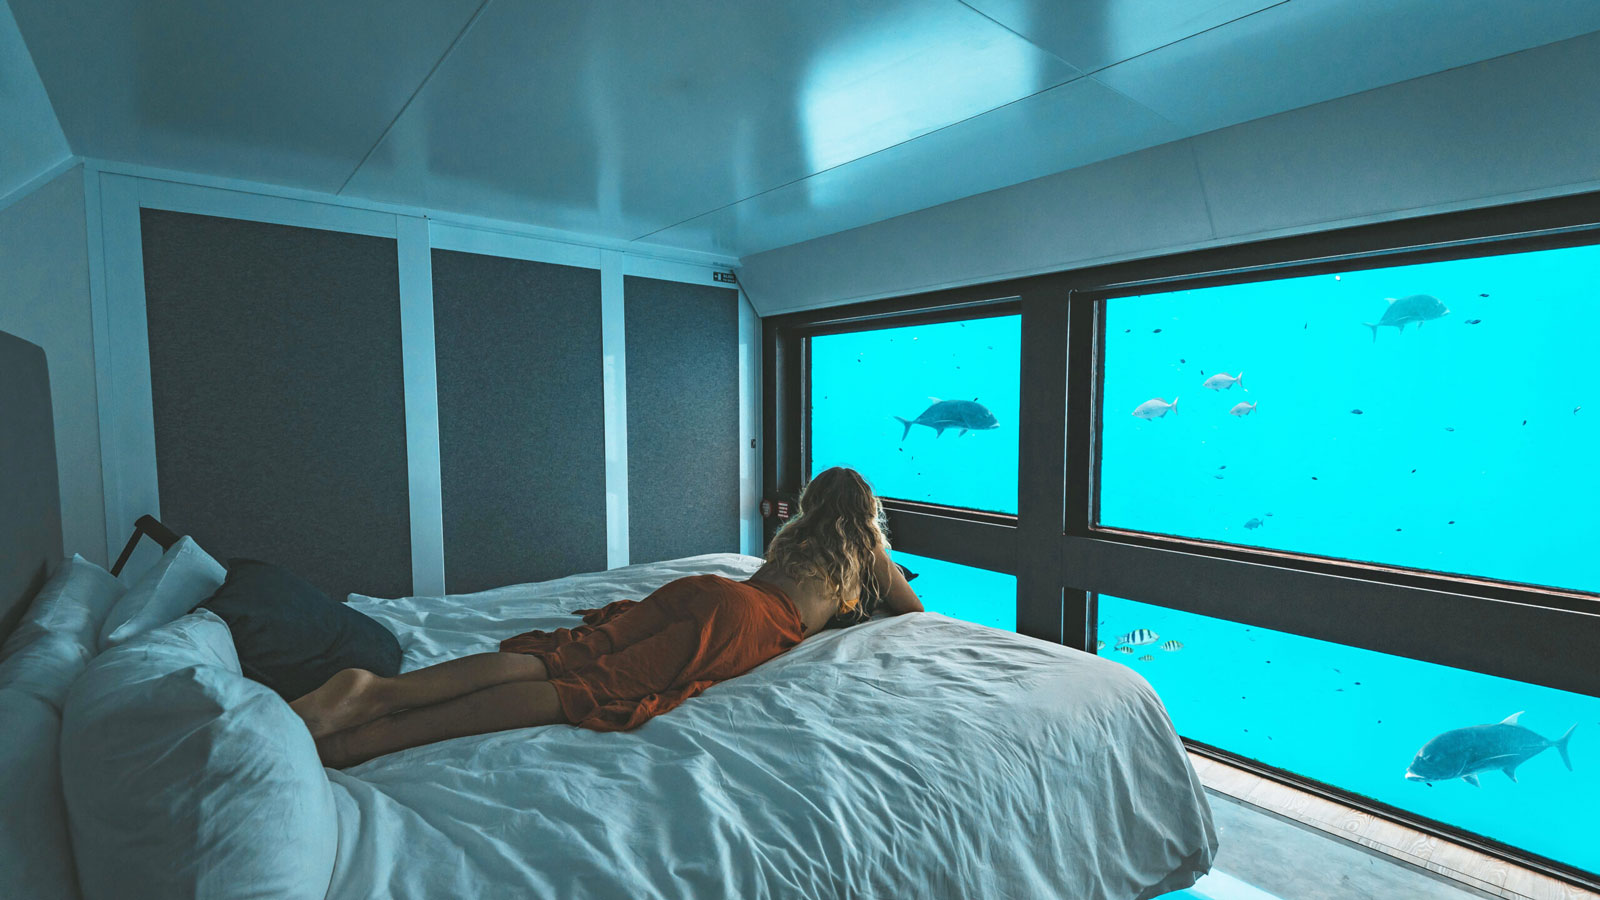 Australia’s First Underwater Hotel Provides Tourists With A Moral Dilemma